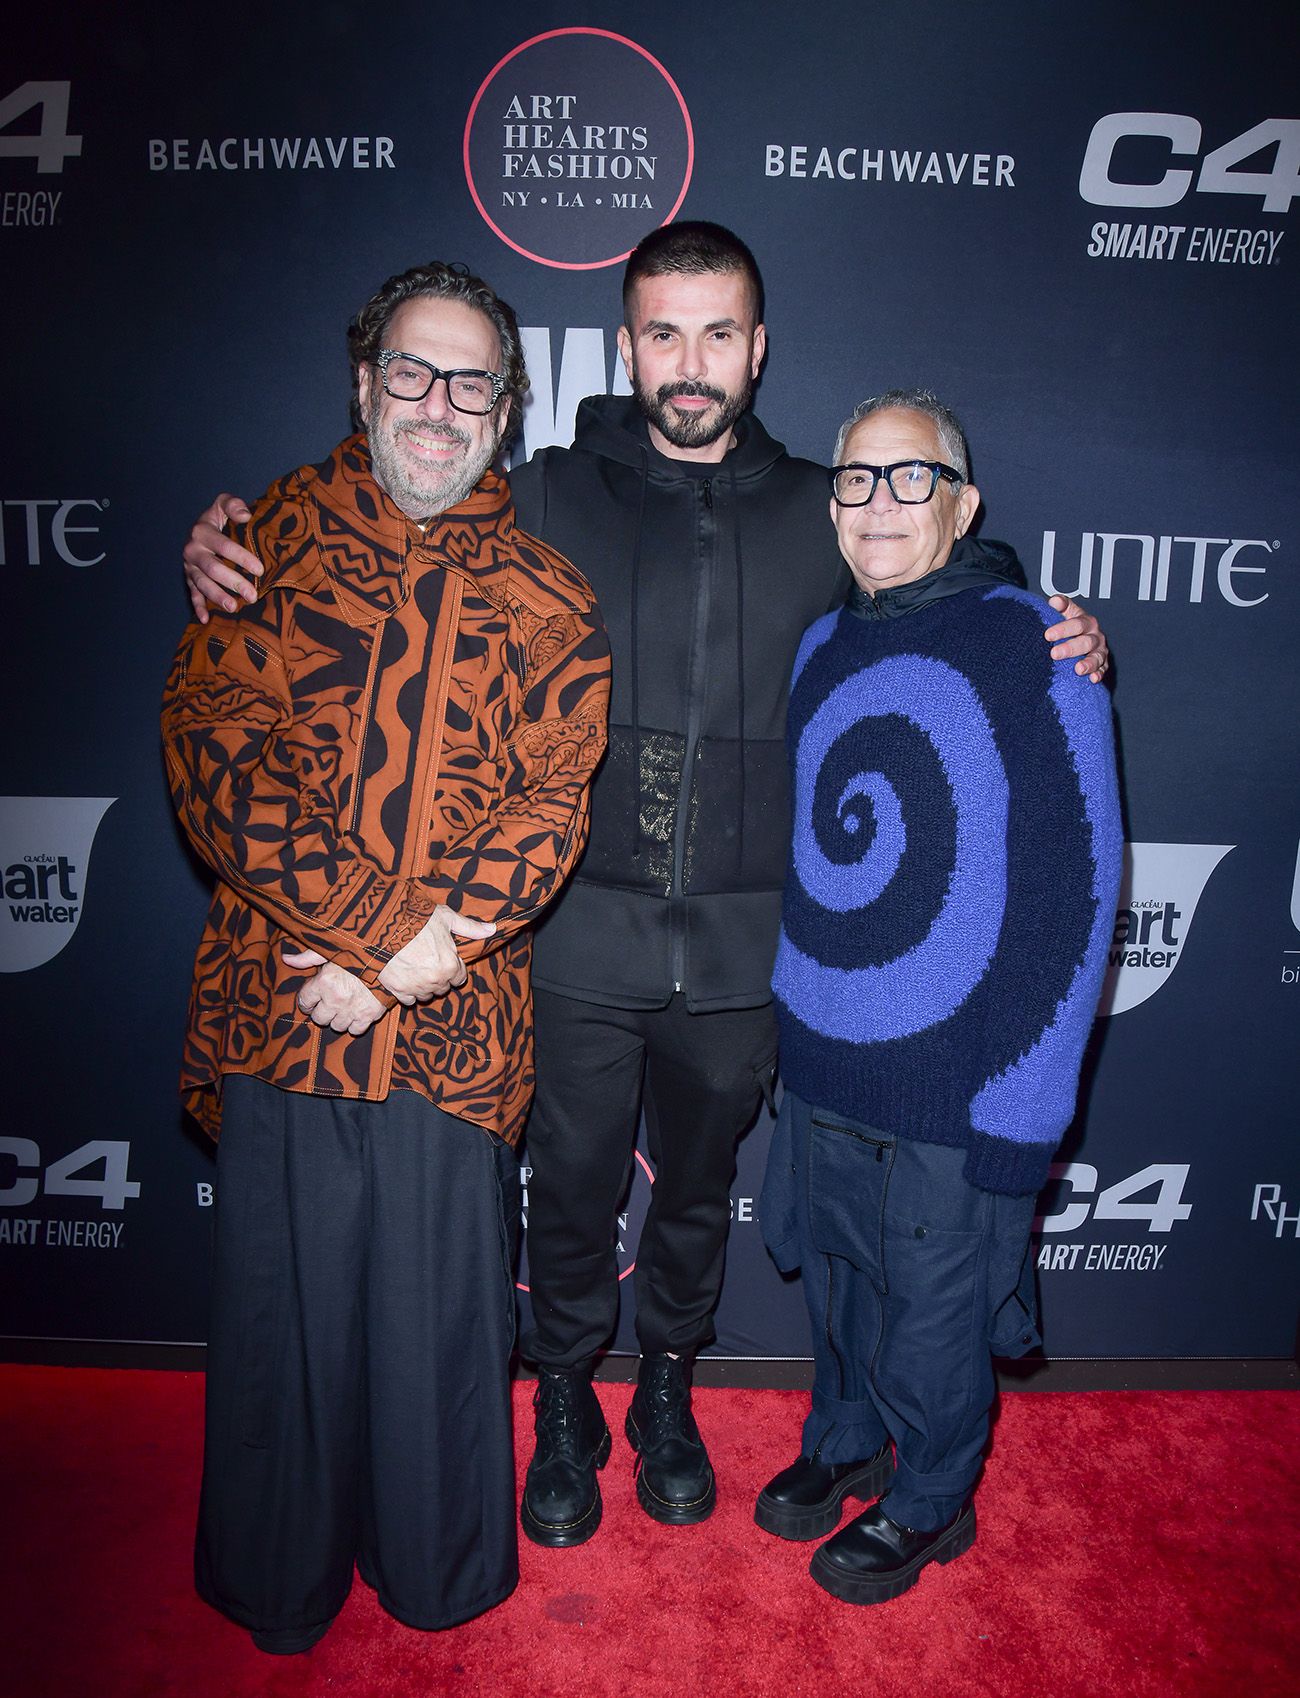 NEW YORK, NEW YORK - FEBRUARY 08: Jose Forteza Erik Rosete and Luis Sanchez arrives on the red carpet during New York Fashion Week Powered by Art Hearts Fashion at The Angel Orensanz Foundation on February 08, 2024 in New York City.  (Photo by Mark Gunter/Getty Images for Art Hearts Fashion)